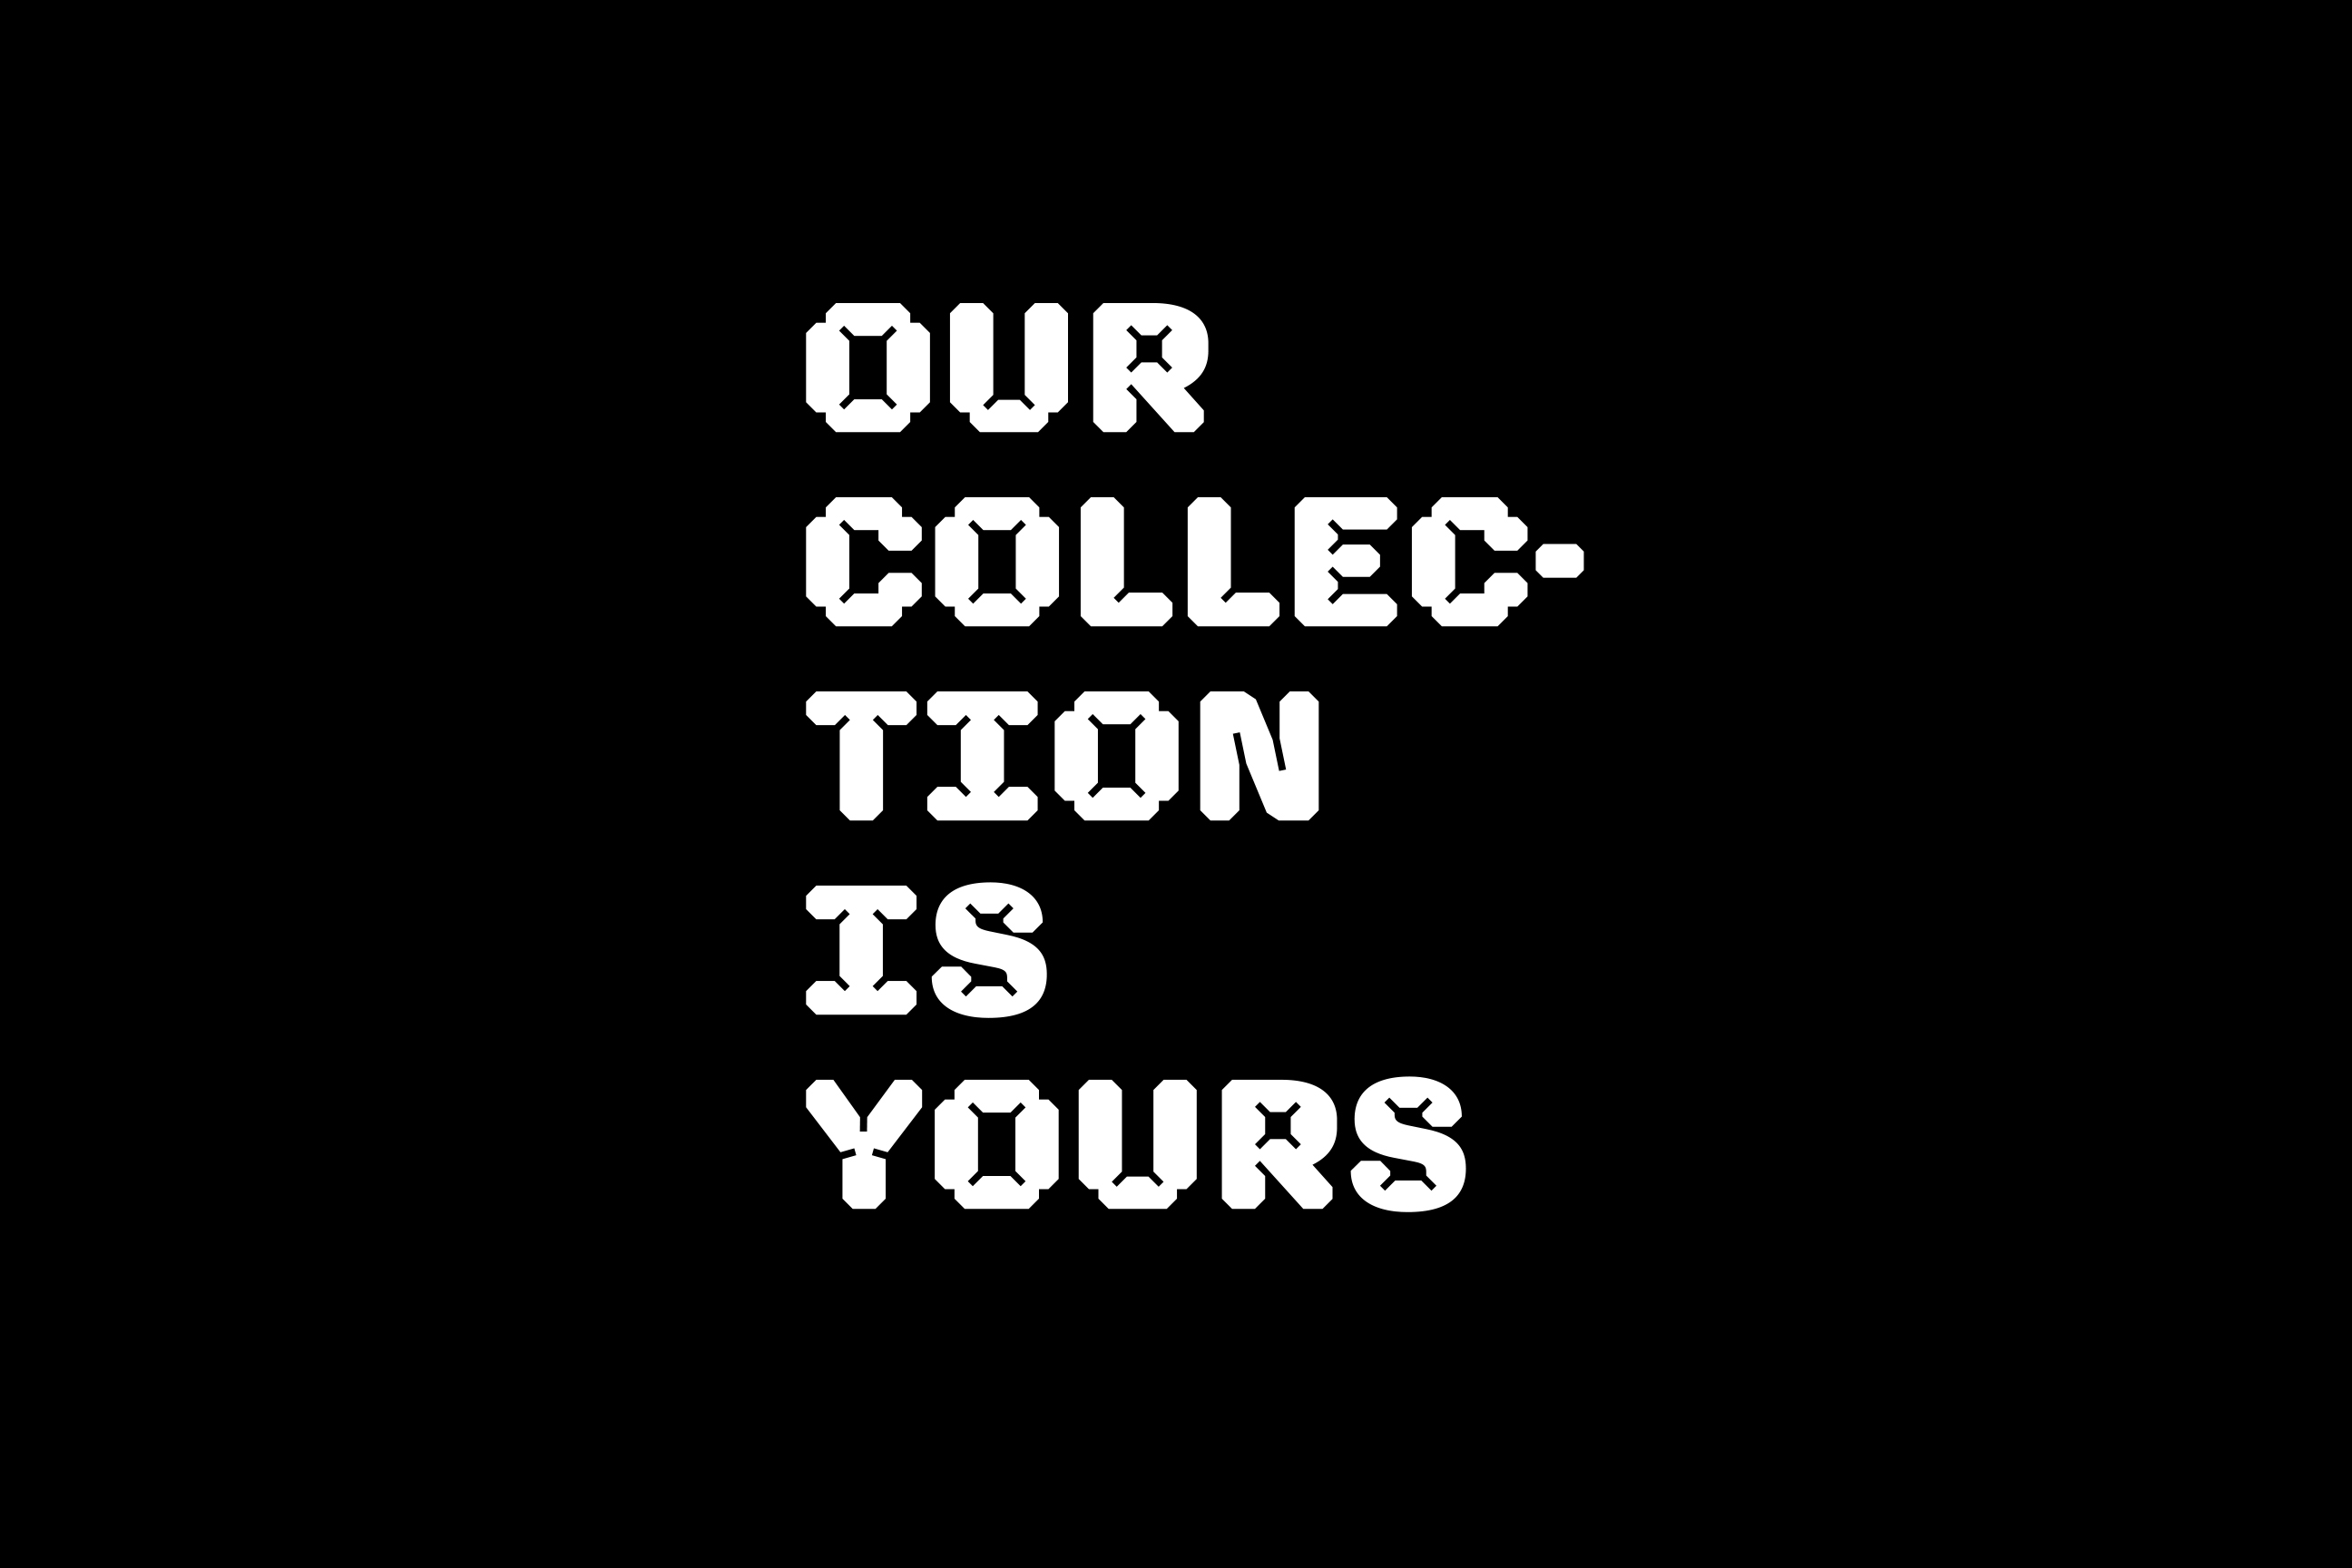 Our collection is yours